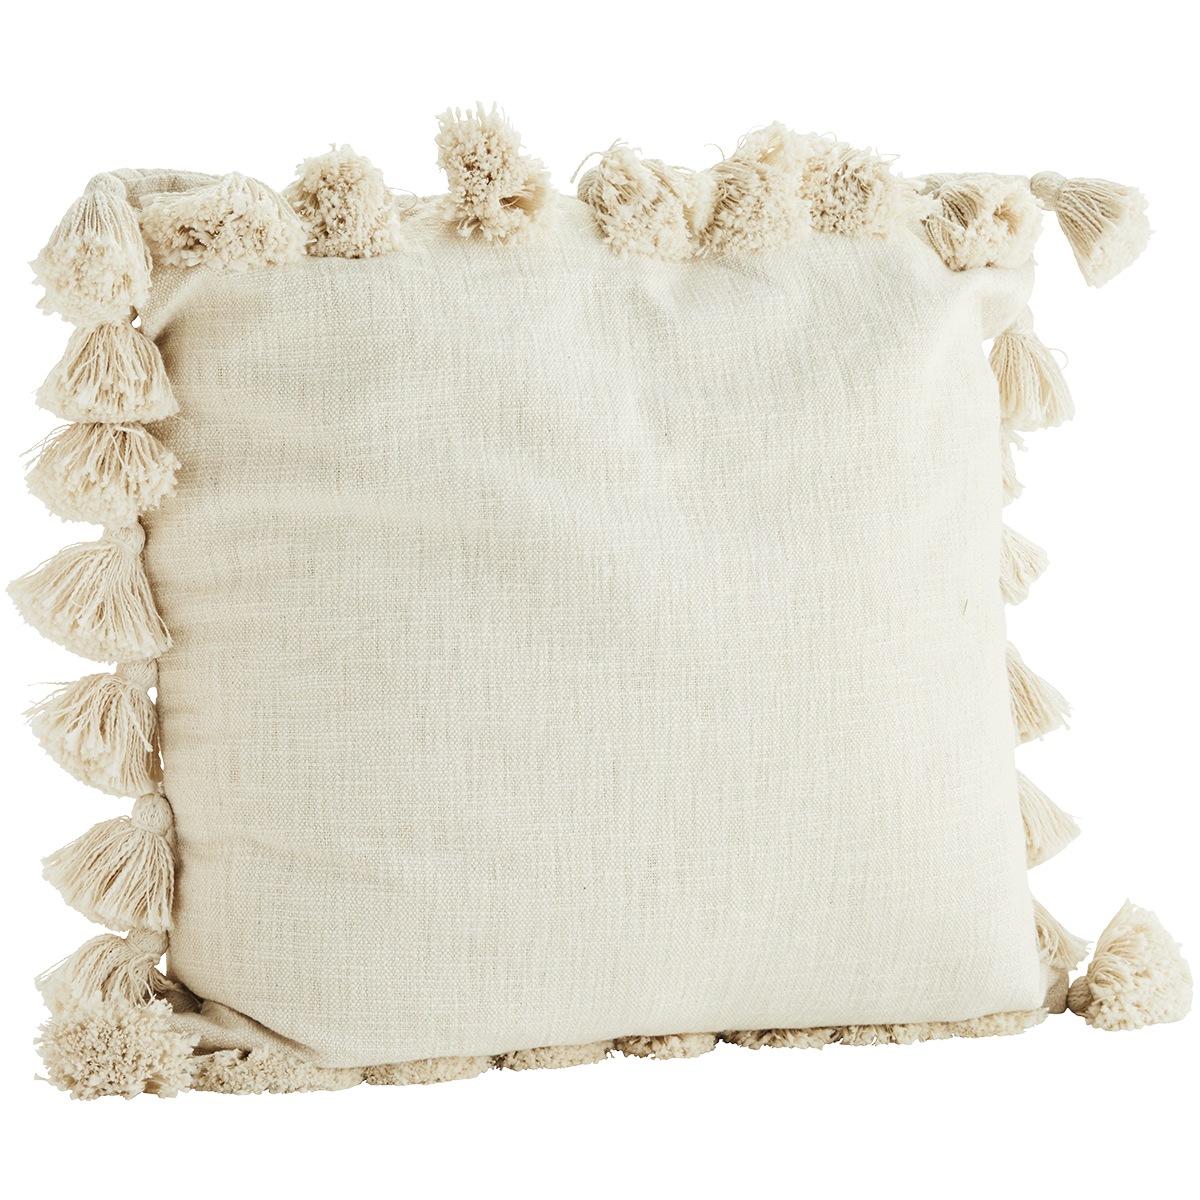 Cushion cover with tassels 60x60 cm, Off-White